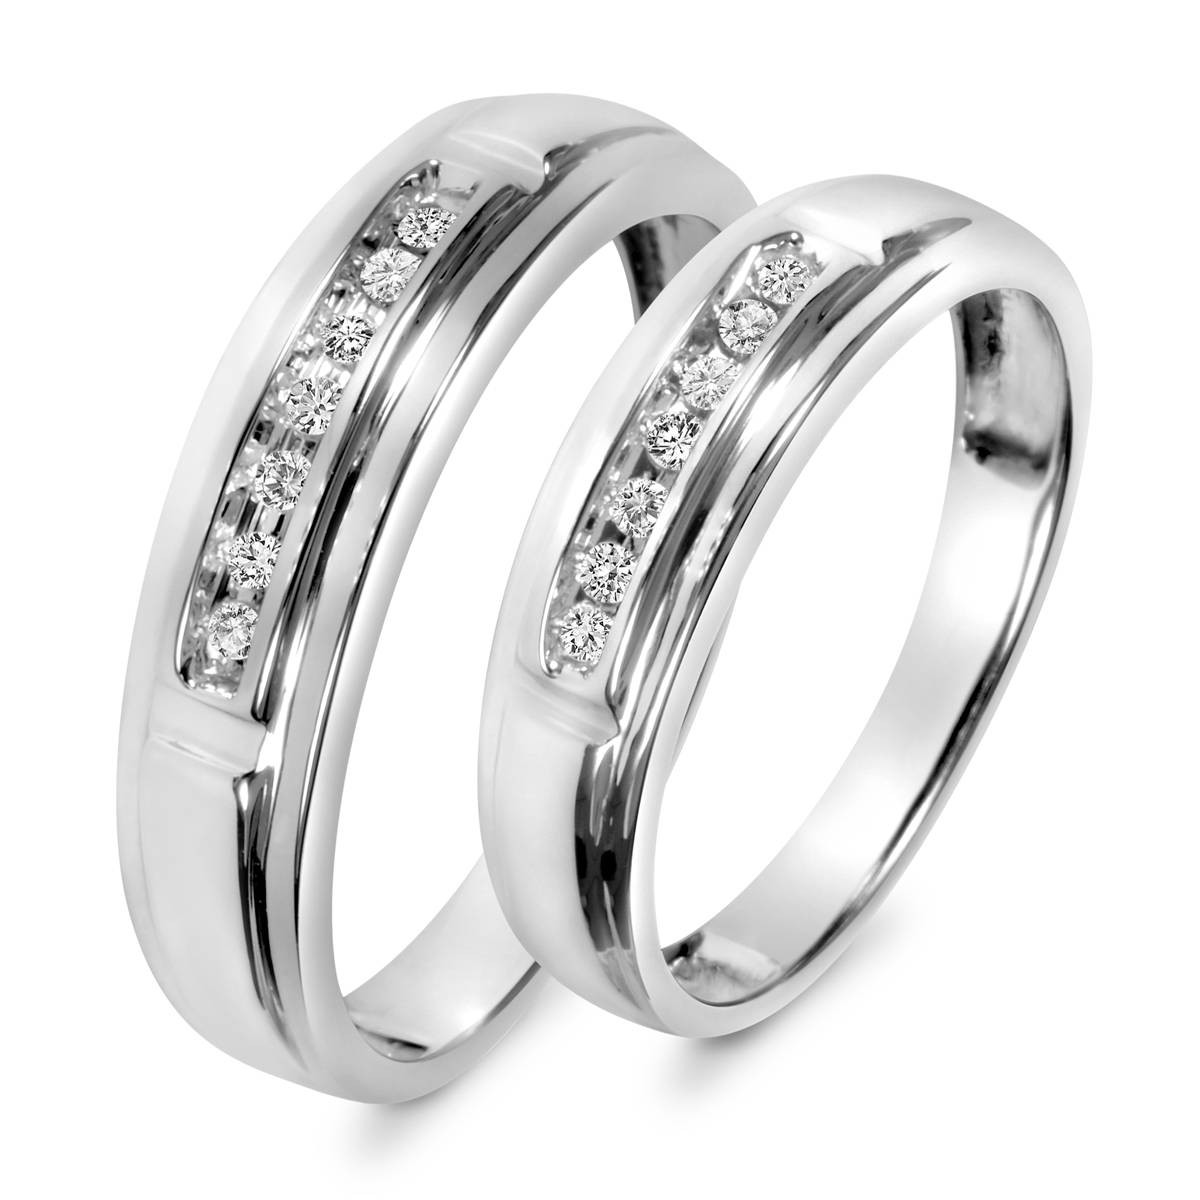 Cheap Wedding Band Sets For Him And Her
 15 Inspirations of Cheap Wedding Bands Sets His And Hers